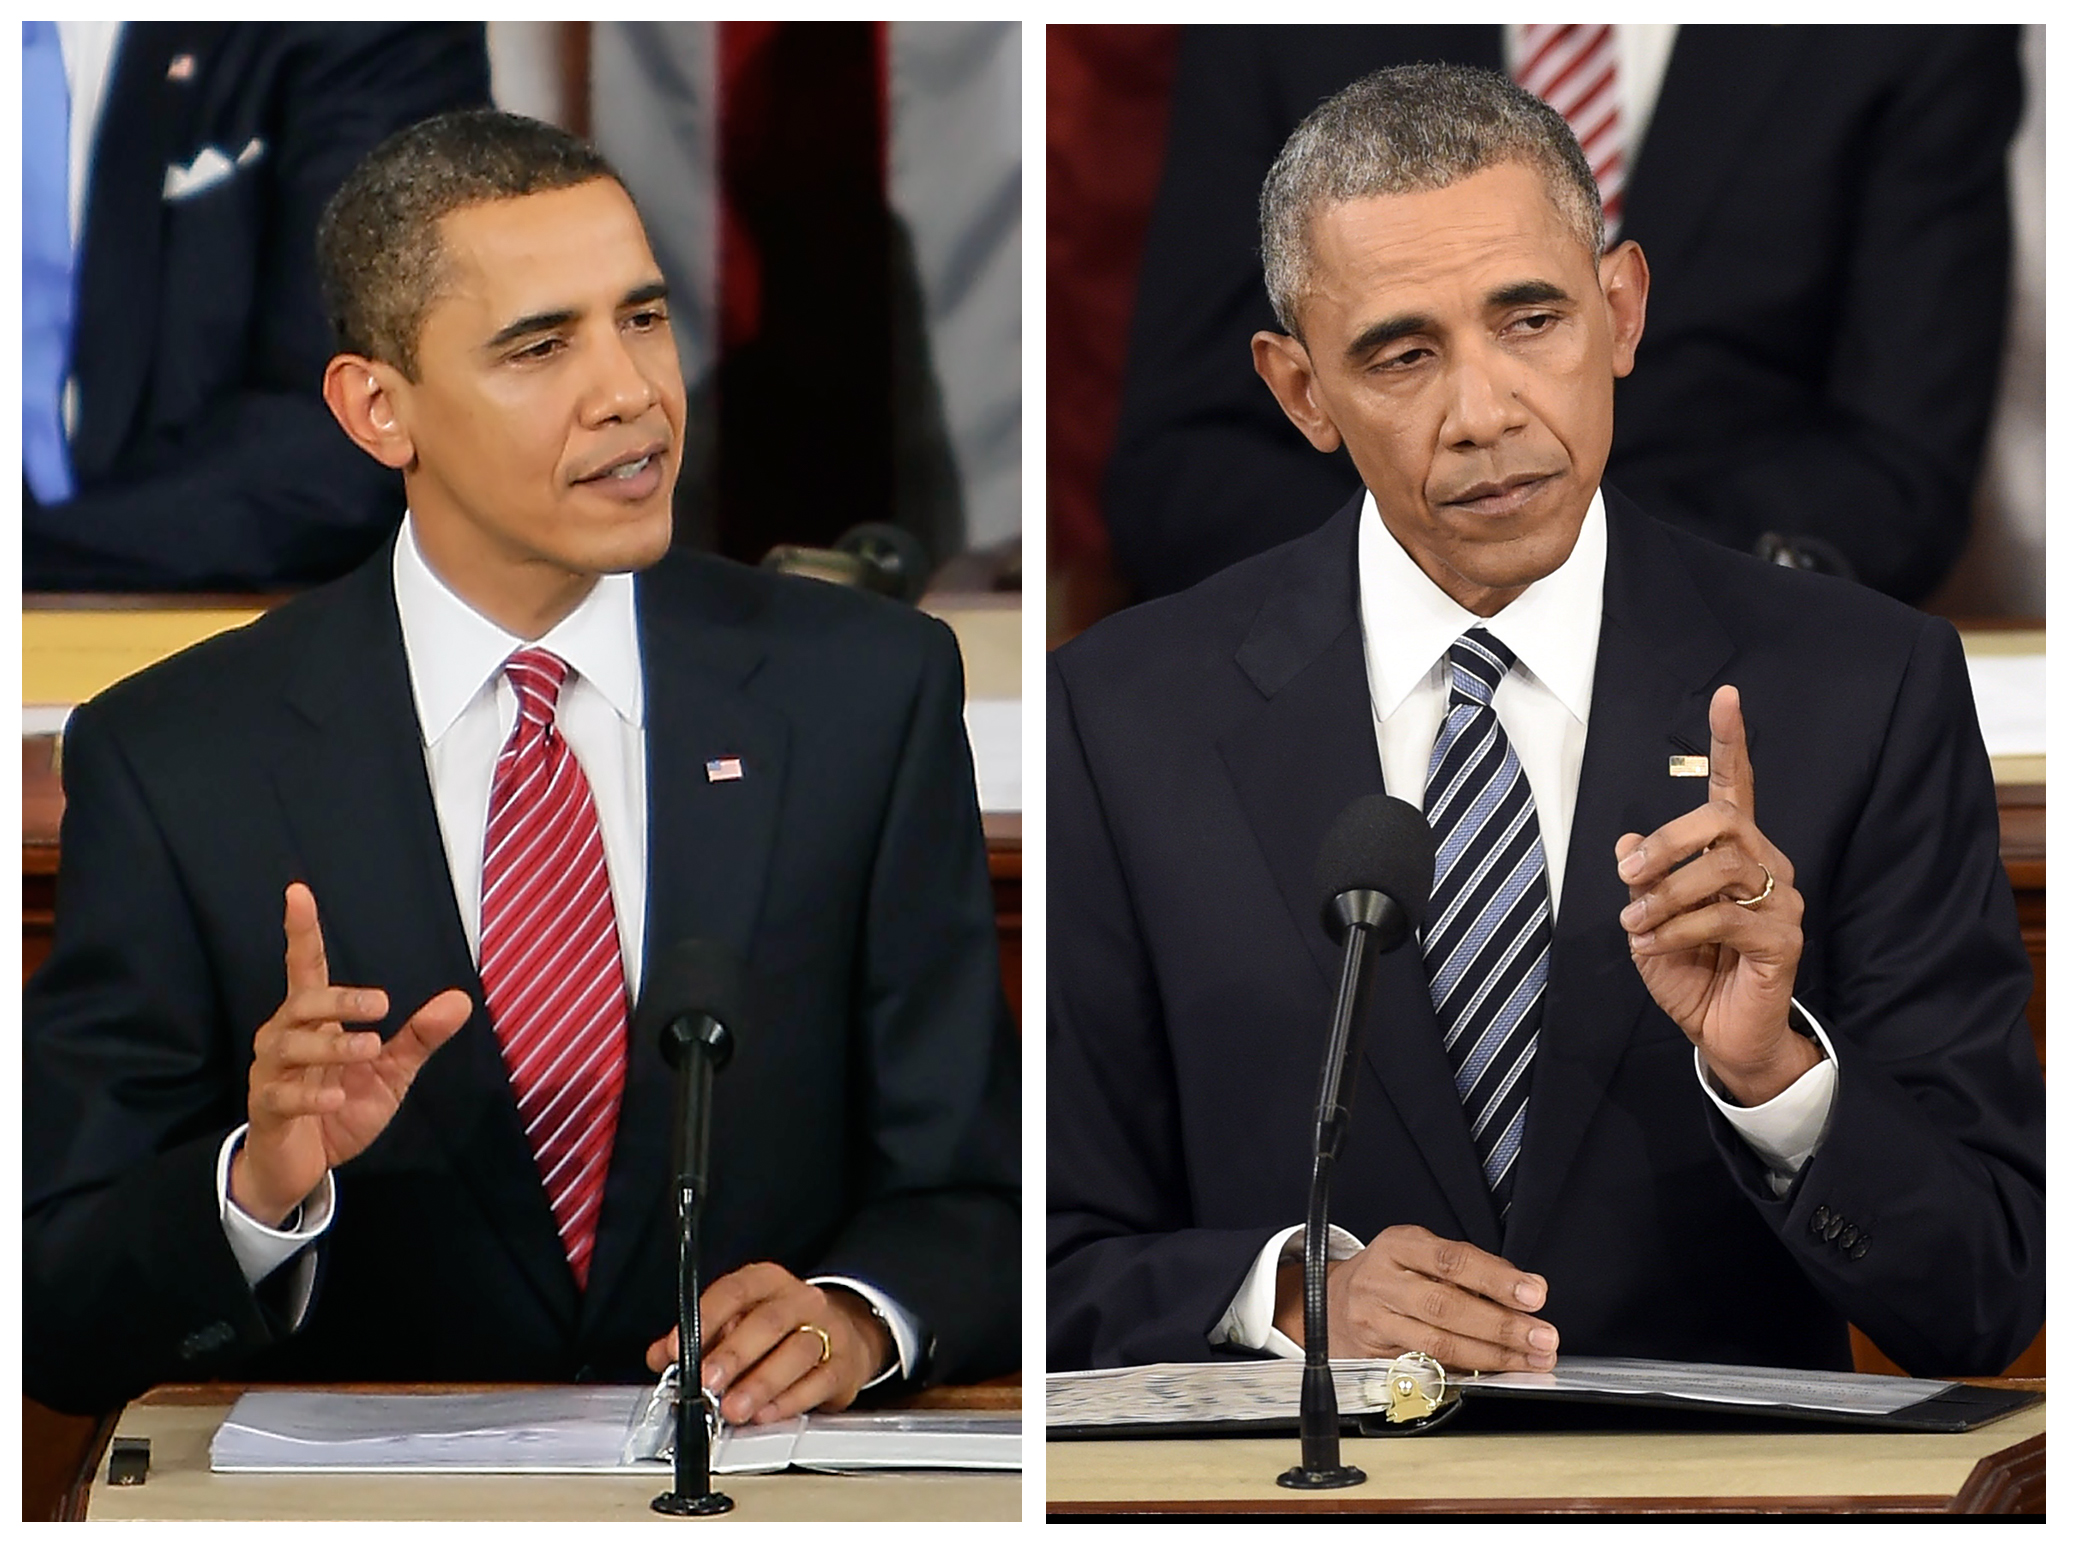 President Barack Obama in his 2009 address to a joint session of congress, left, and in the 2016 State of the Union address, right. (Chuck Kennedy—MCT/Getty Images (L), Saul Loeb—AFP/Getty Images (R))